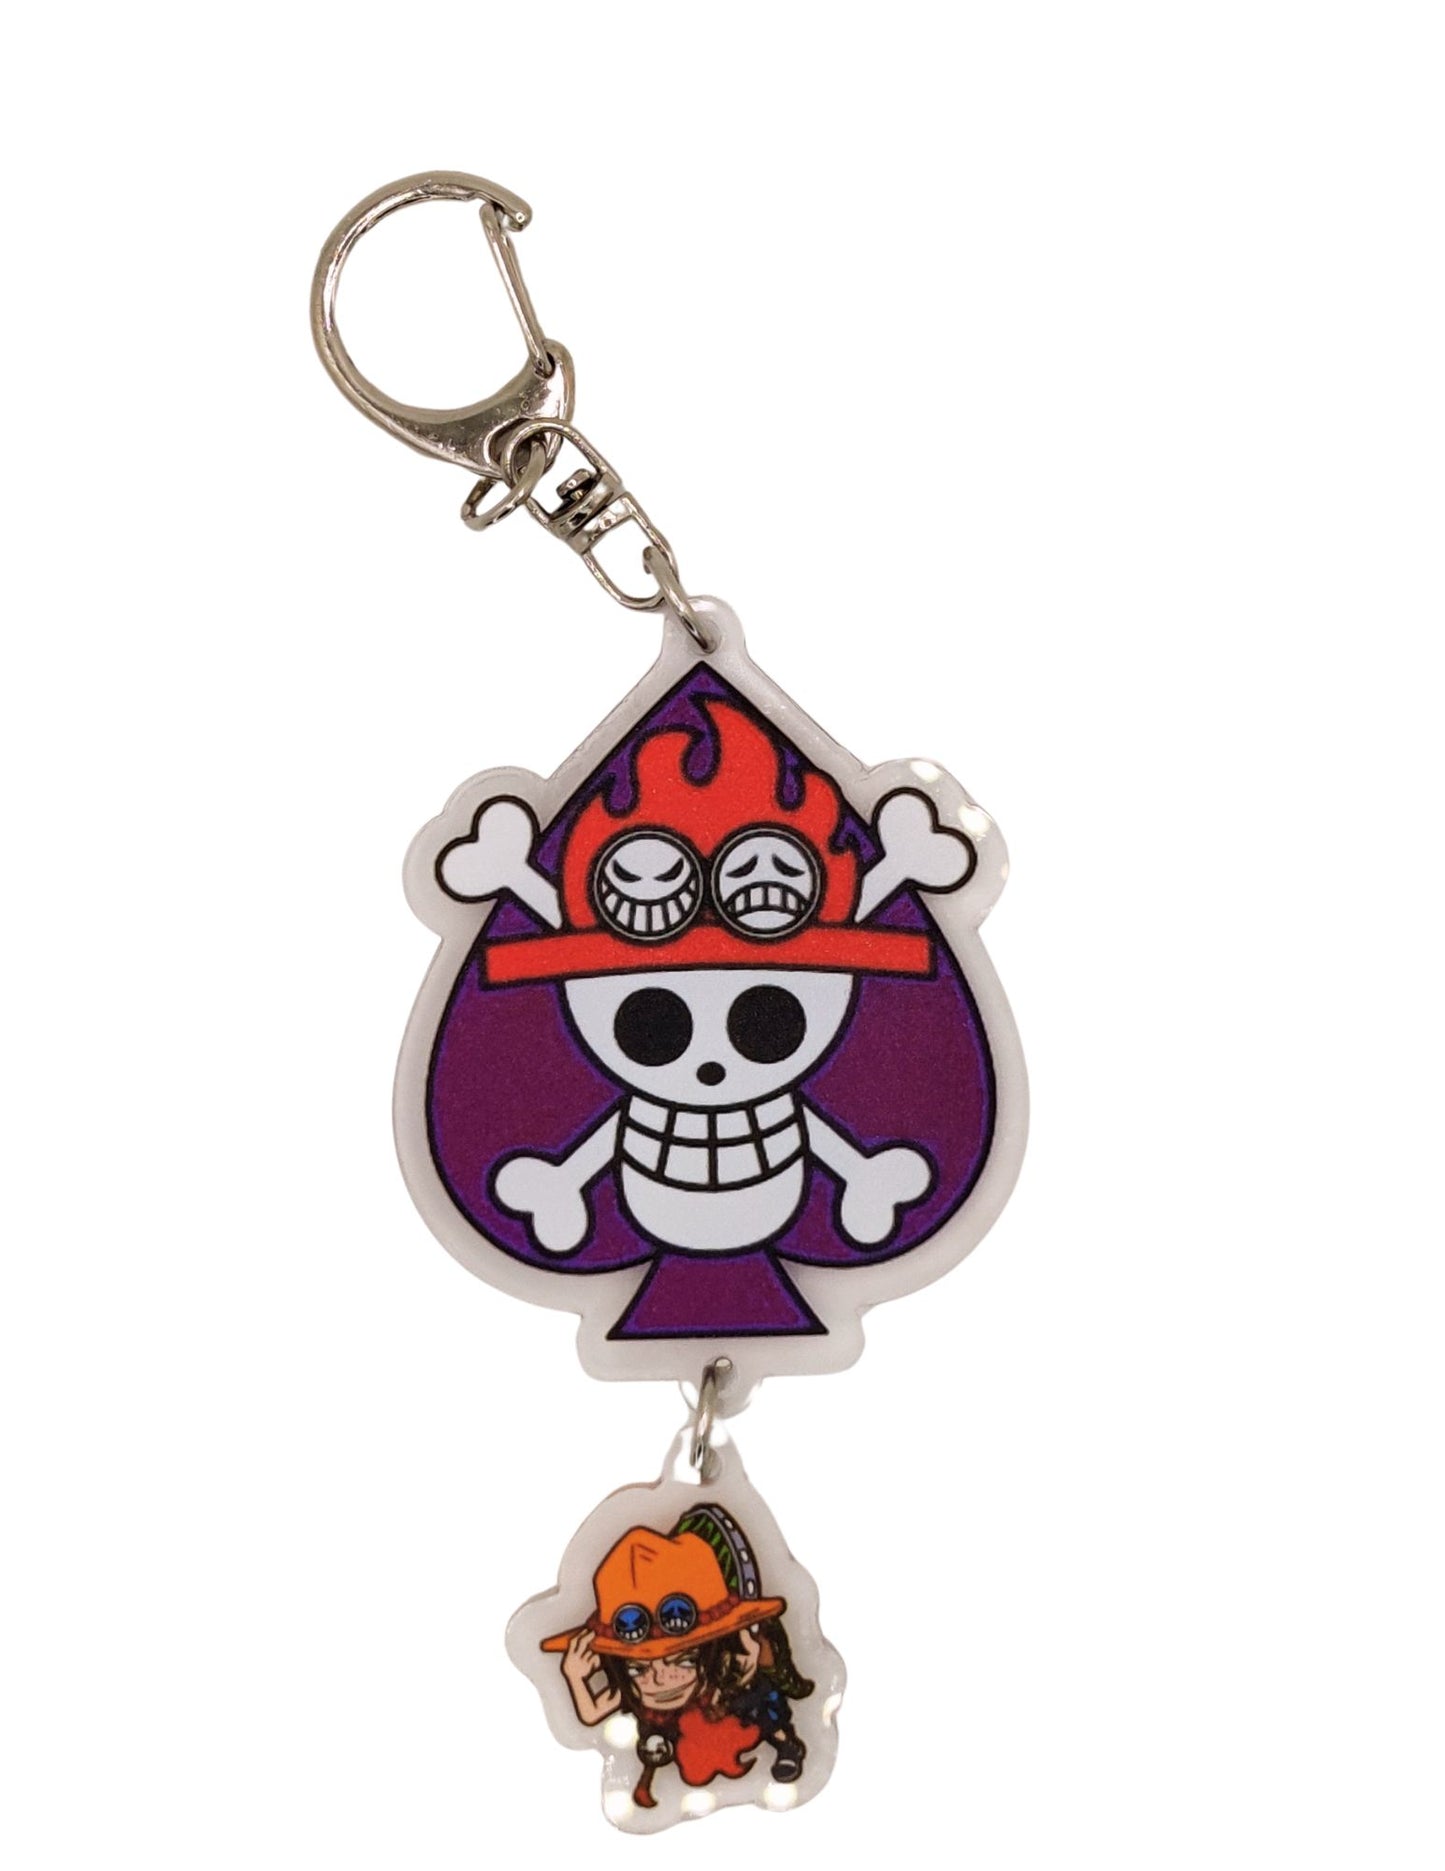 🔥One Piece Non-Straw Hat with Straw Hats Characters Acrylic Keychain🔥